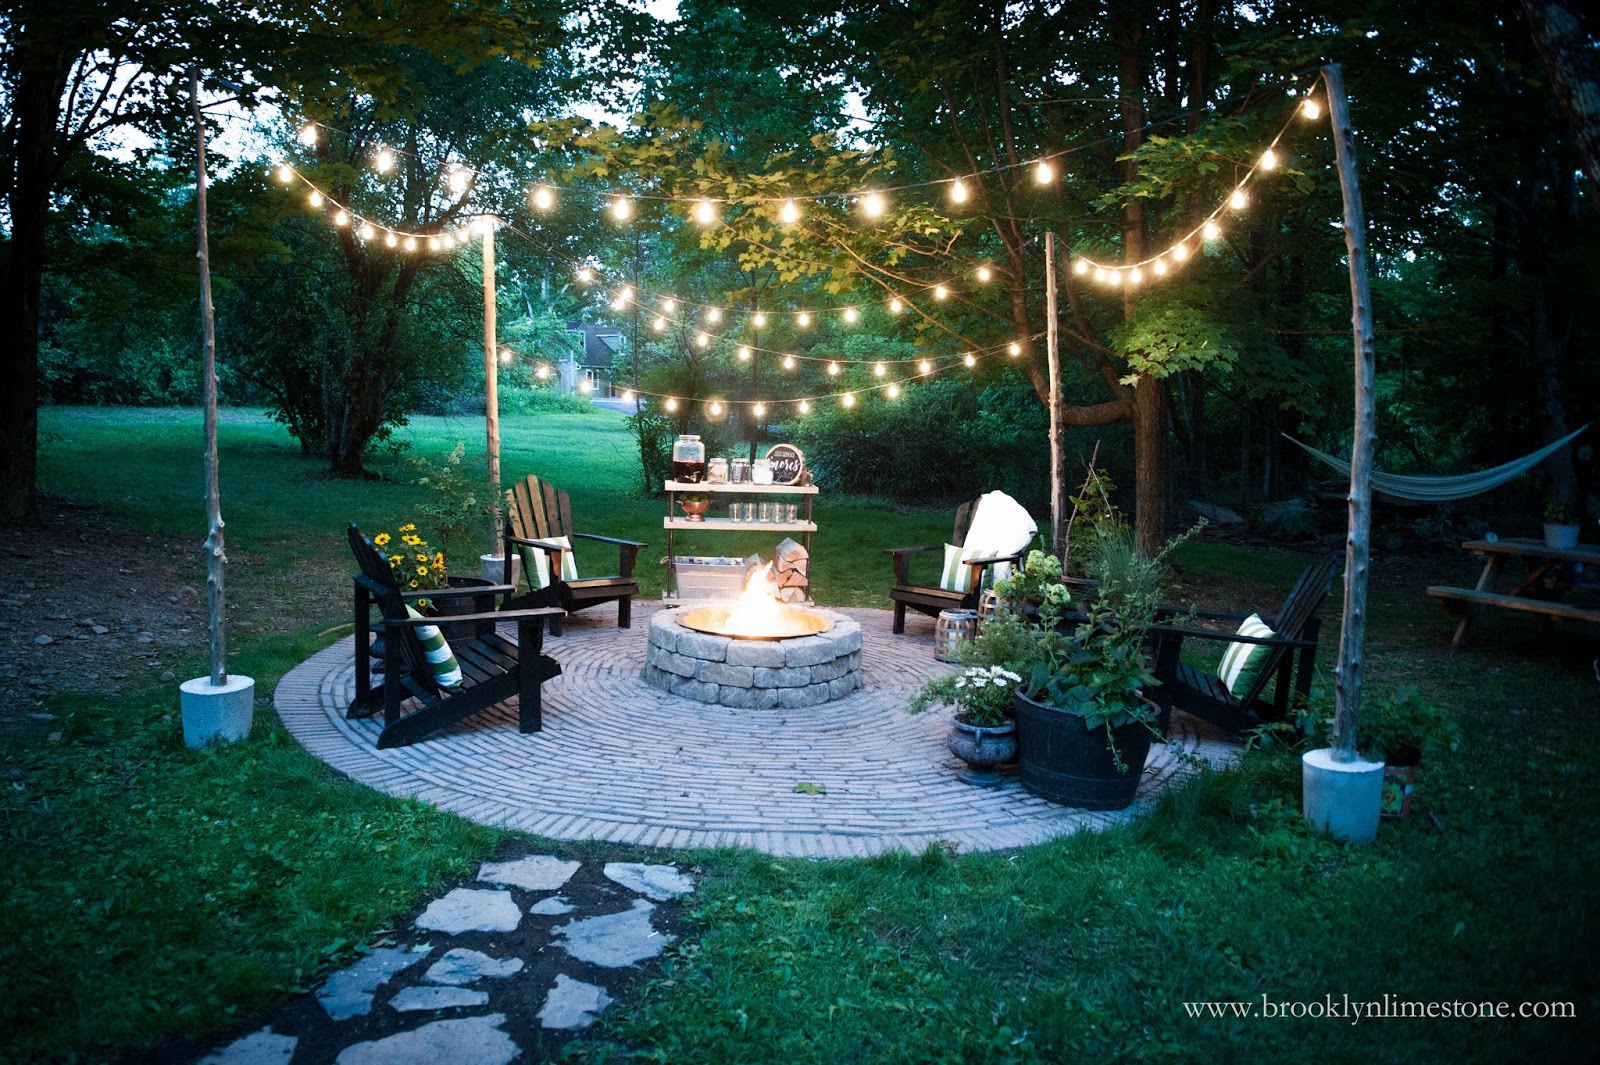 Goodshomedesign, How To Build Fire Pit Patio